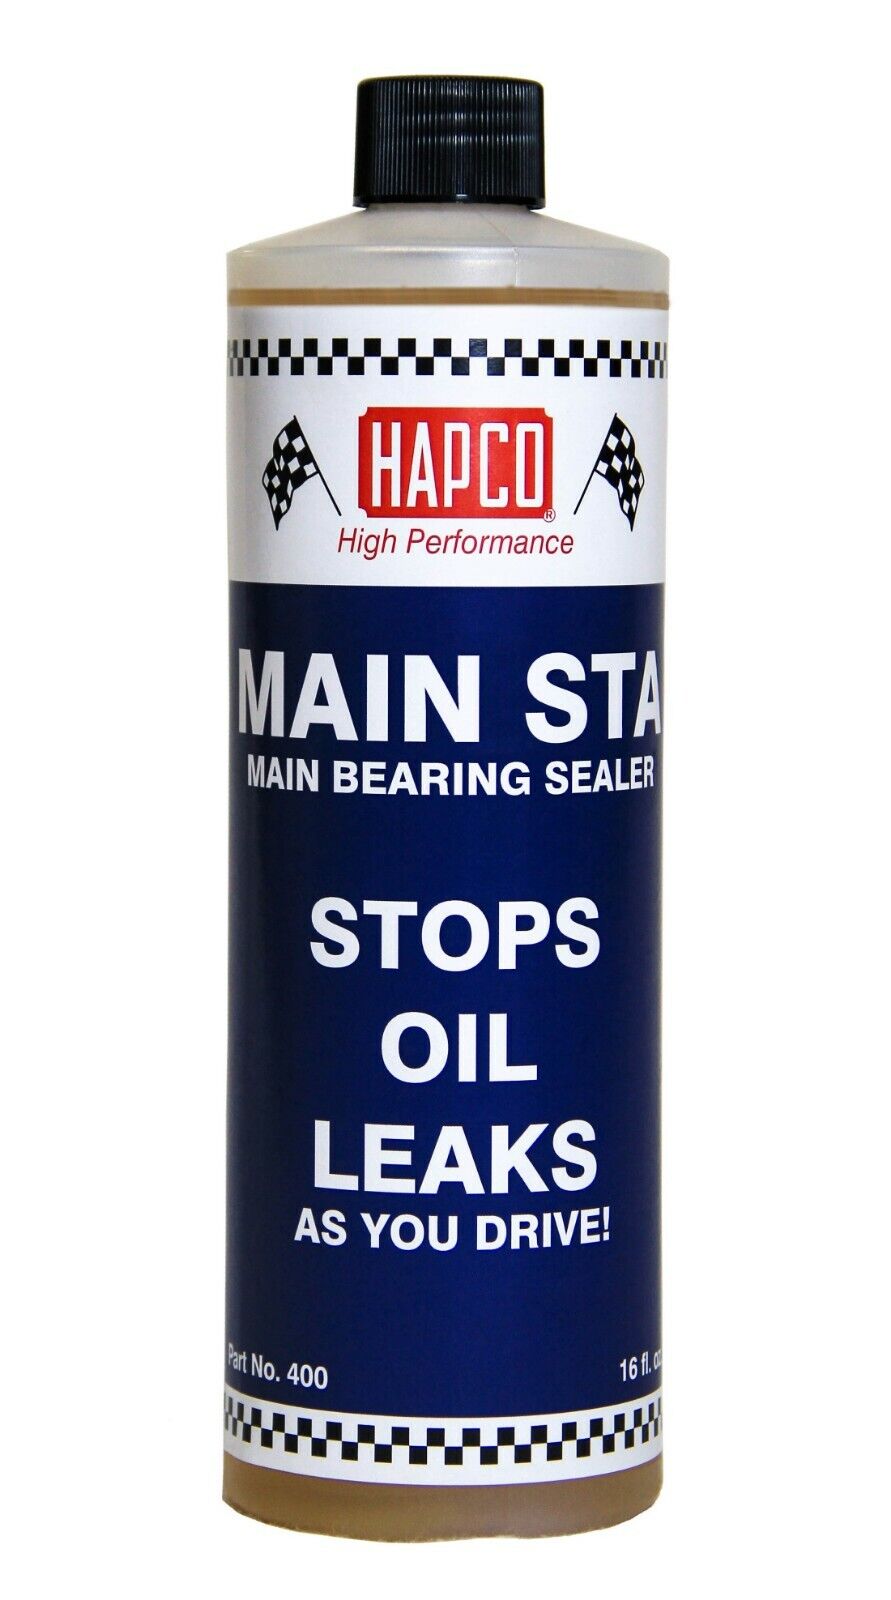 HAPCO - Main Sta - Guaranteed to Stop Engine Oil Leaks or Your Money Back 